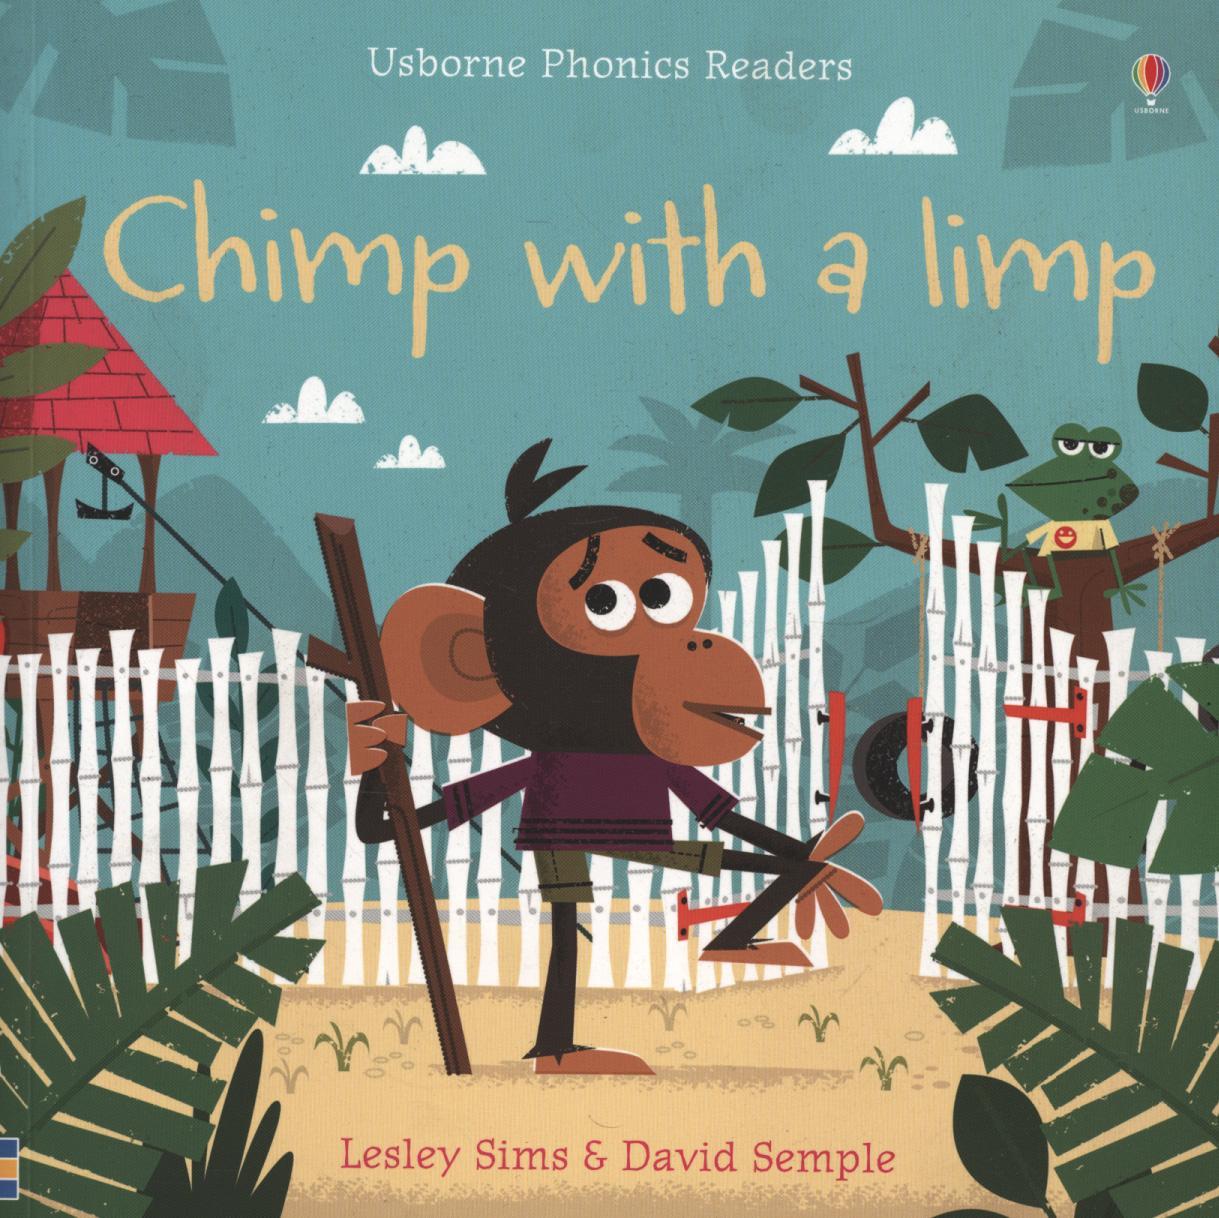 Chimp with a Limp